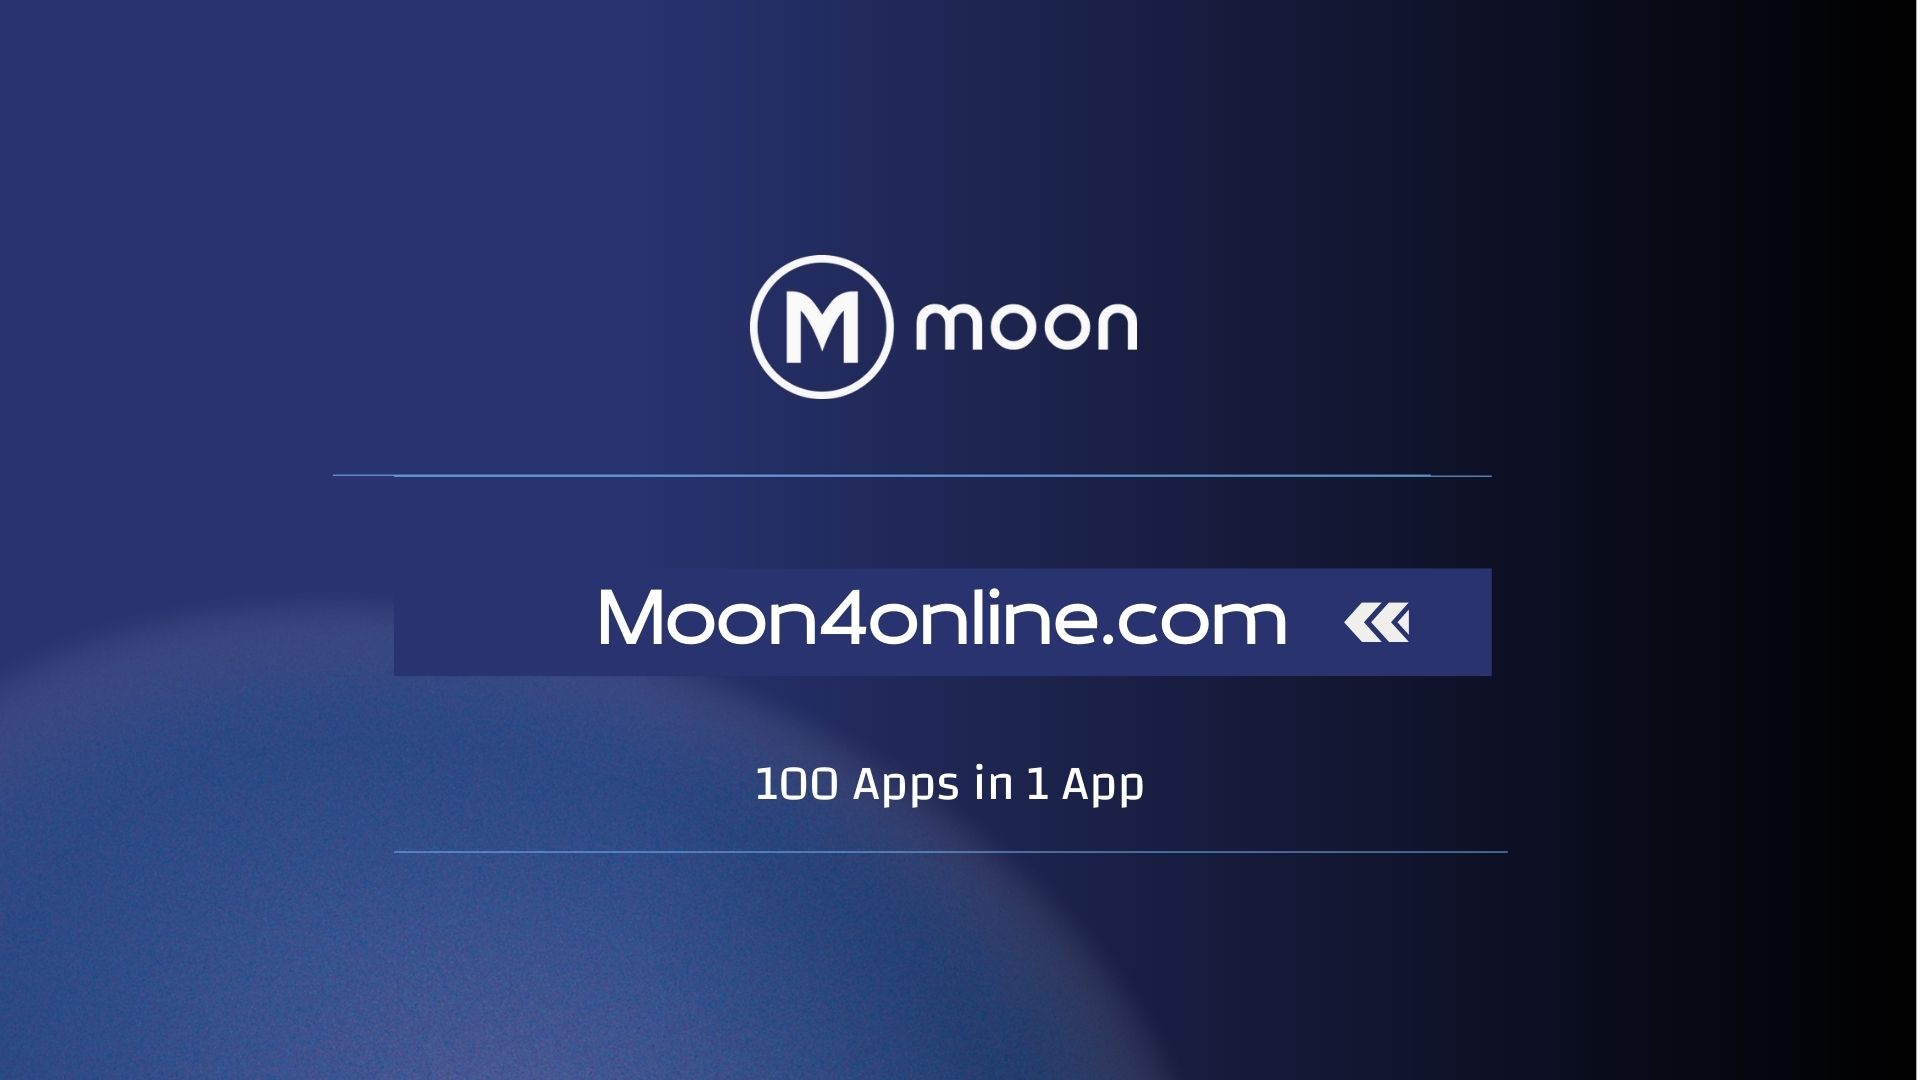 Moon4online is a Futuristic E-Commerce Platform That Caters to Both Businesses and People